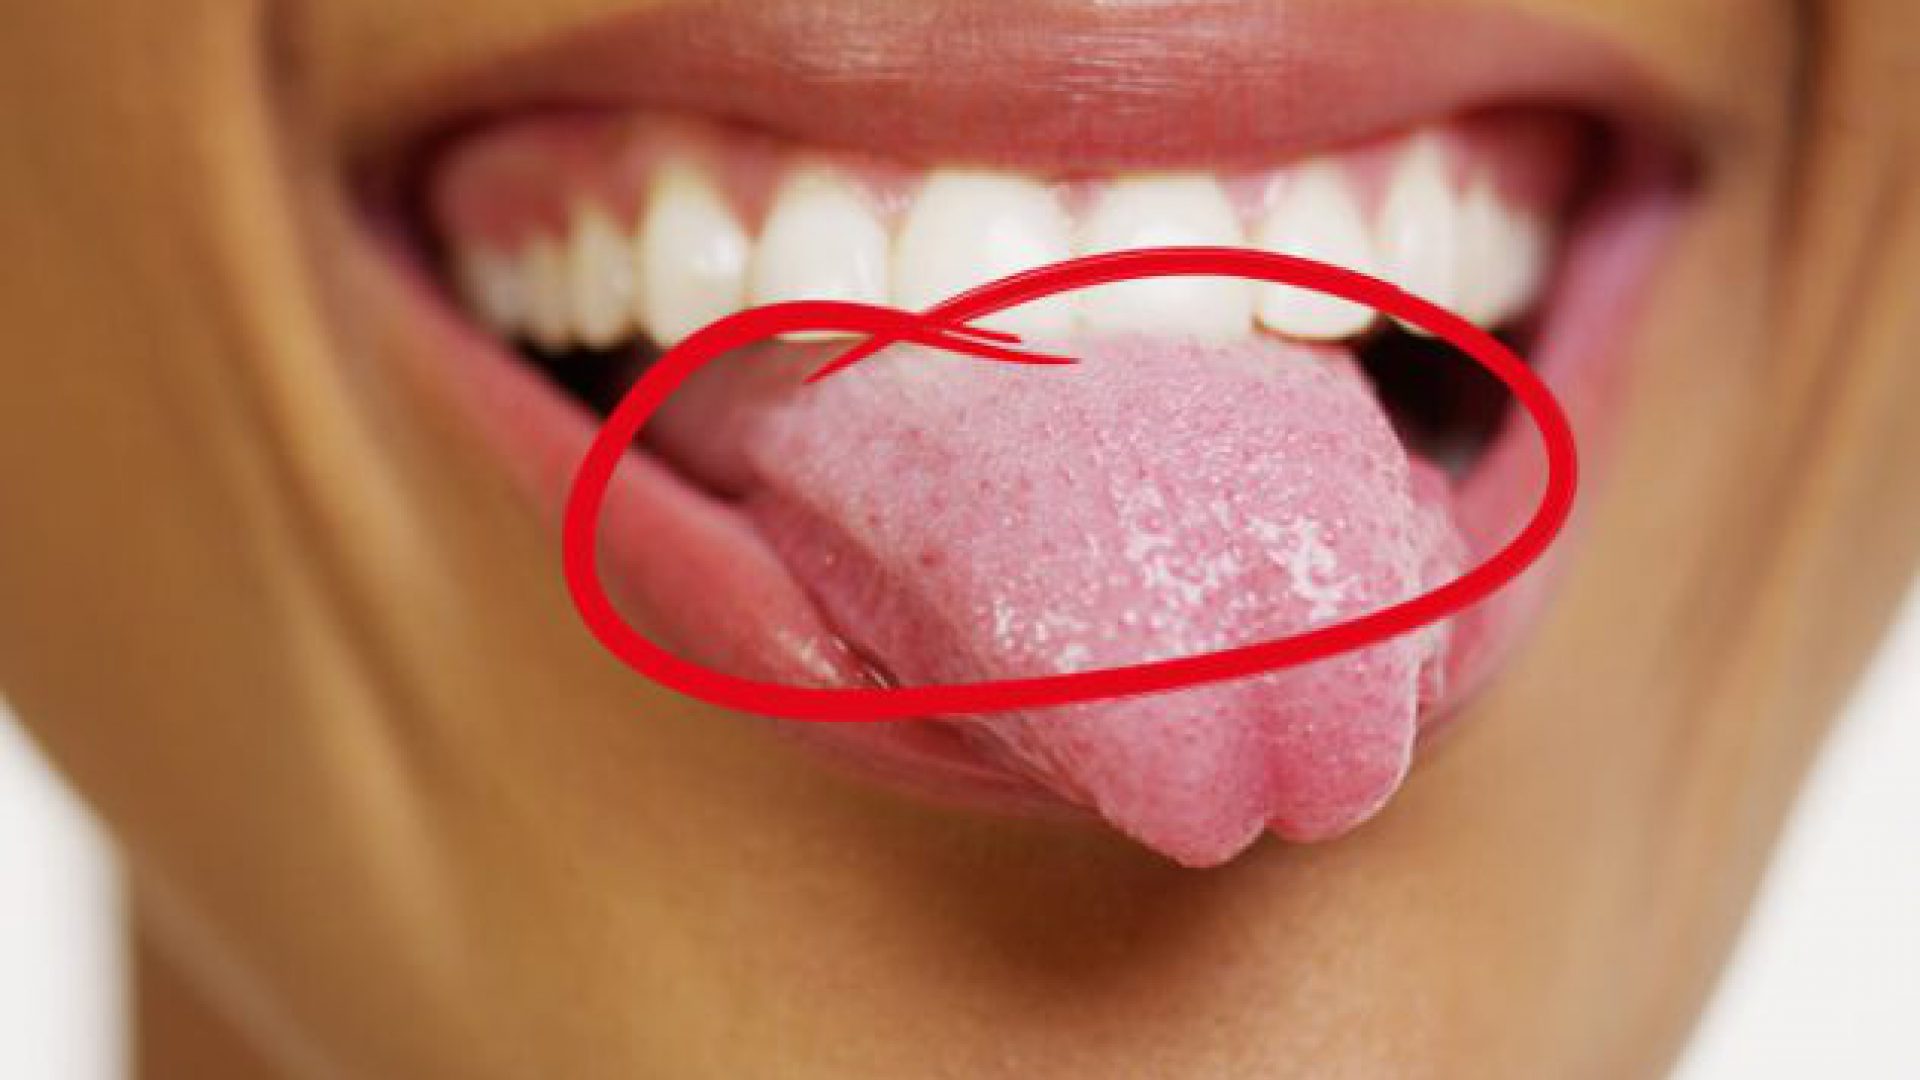 HOW ARE YOU USING YOUR TONGUE?